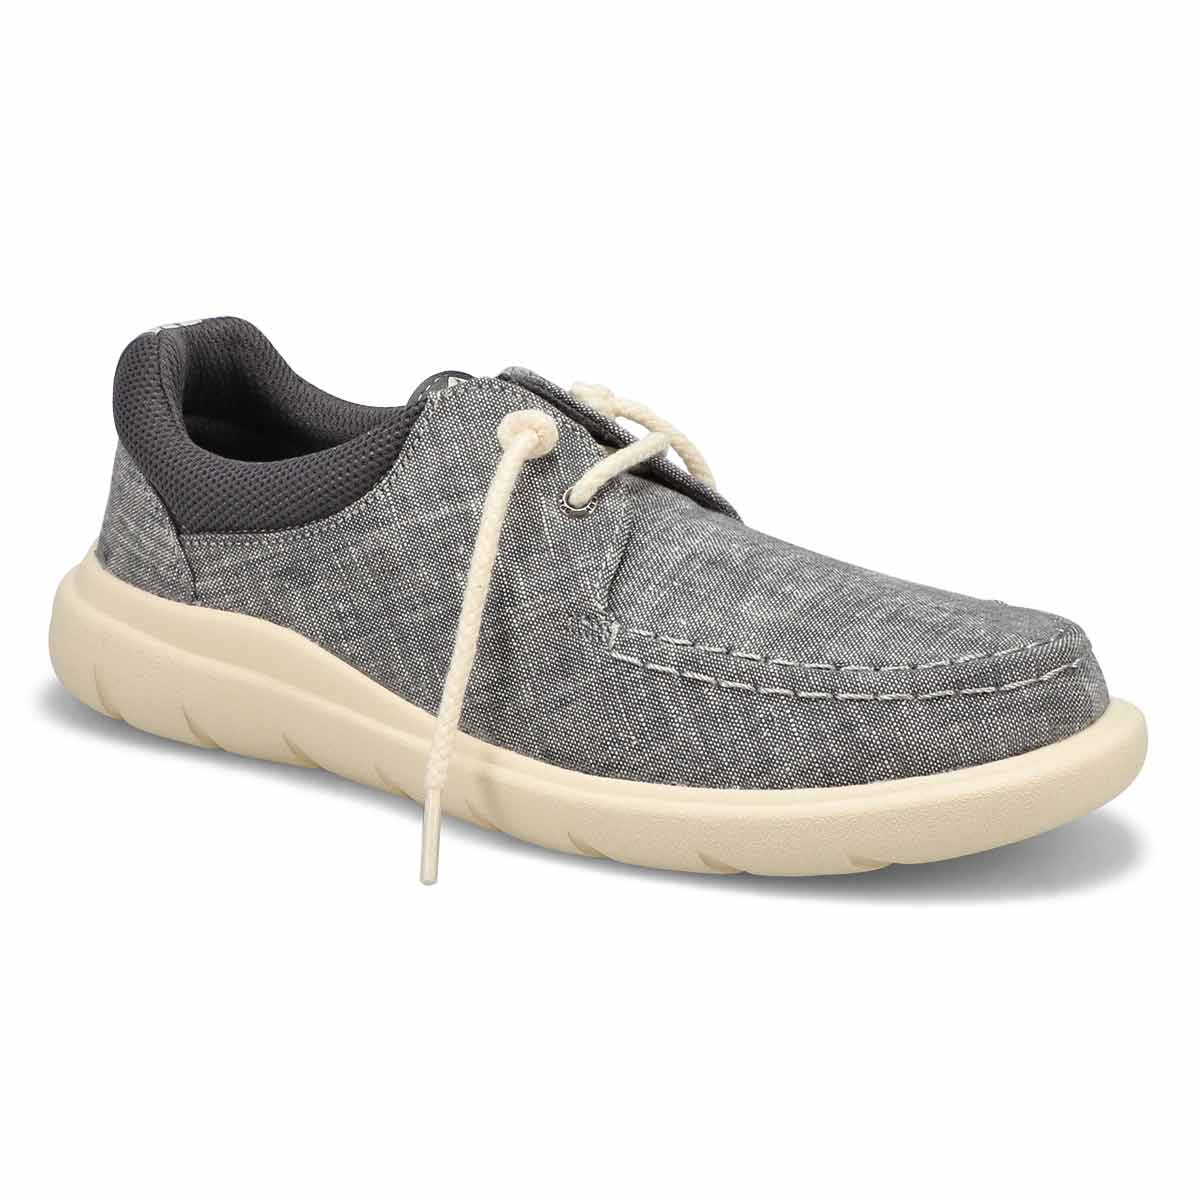 Sperry Women's Captain's Moc Chambray Boat Sh | SoftMoc.com